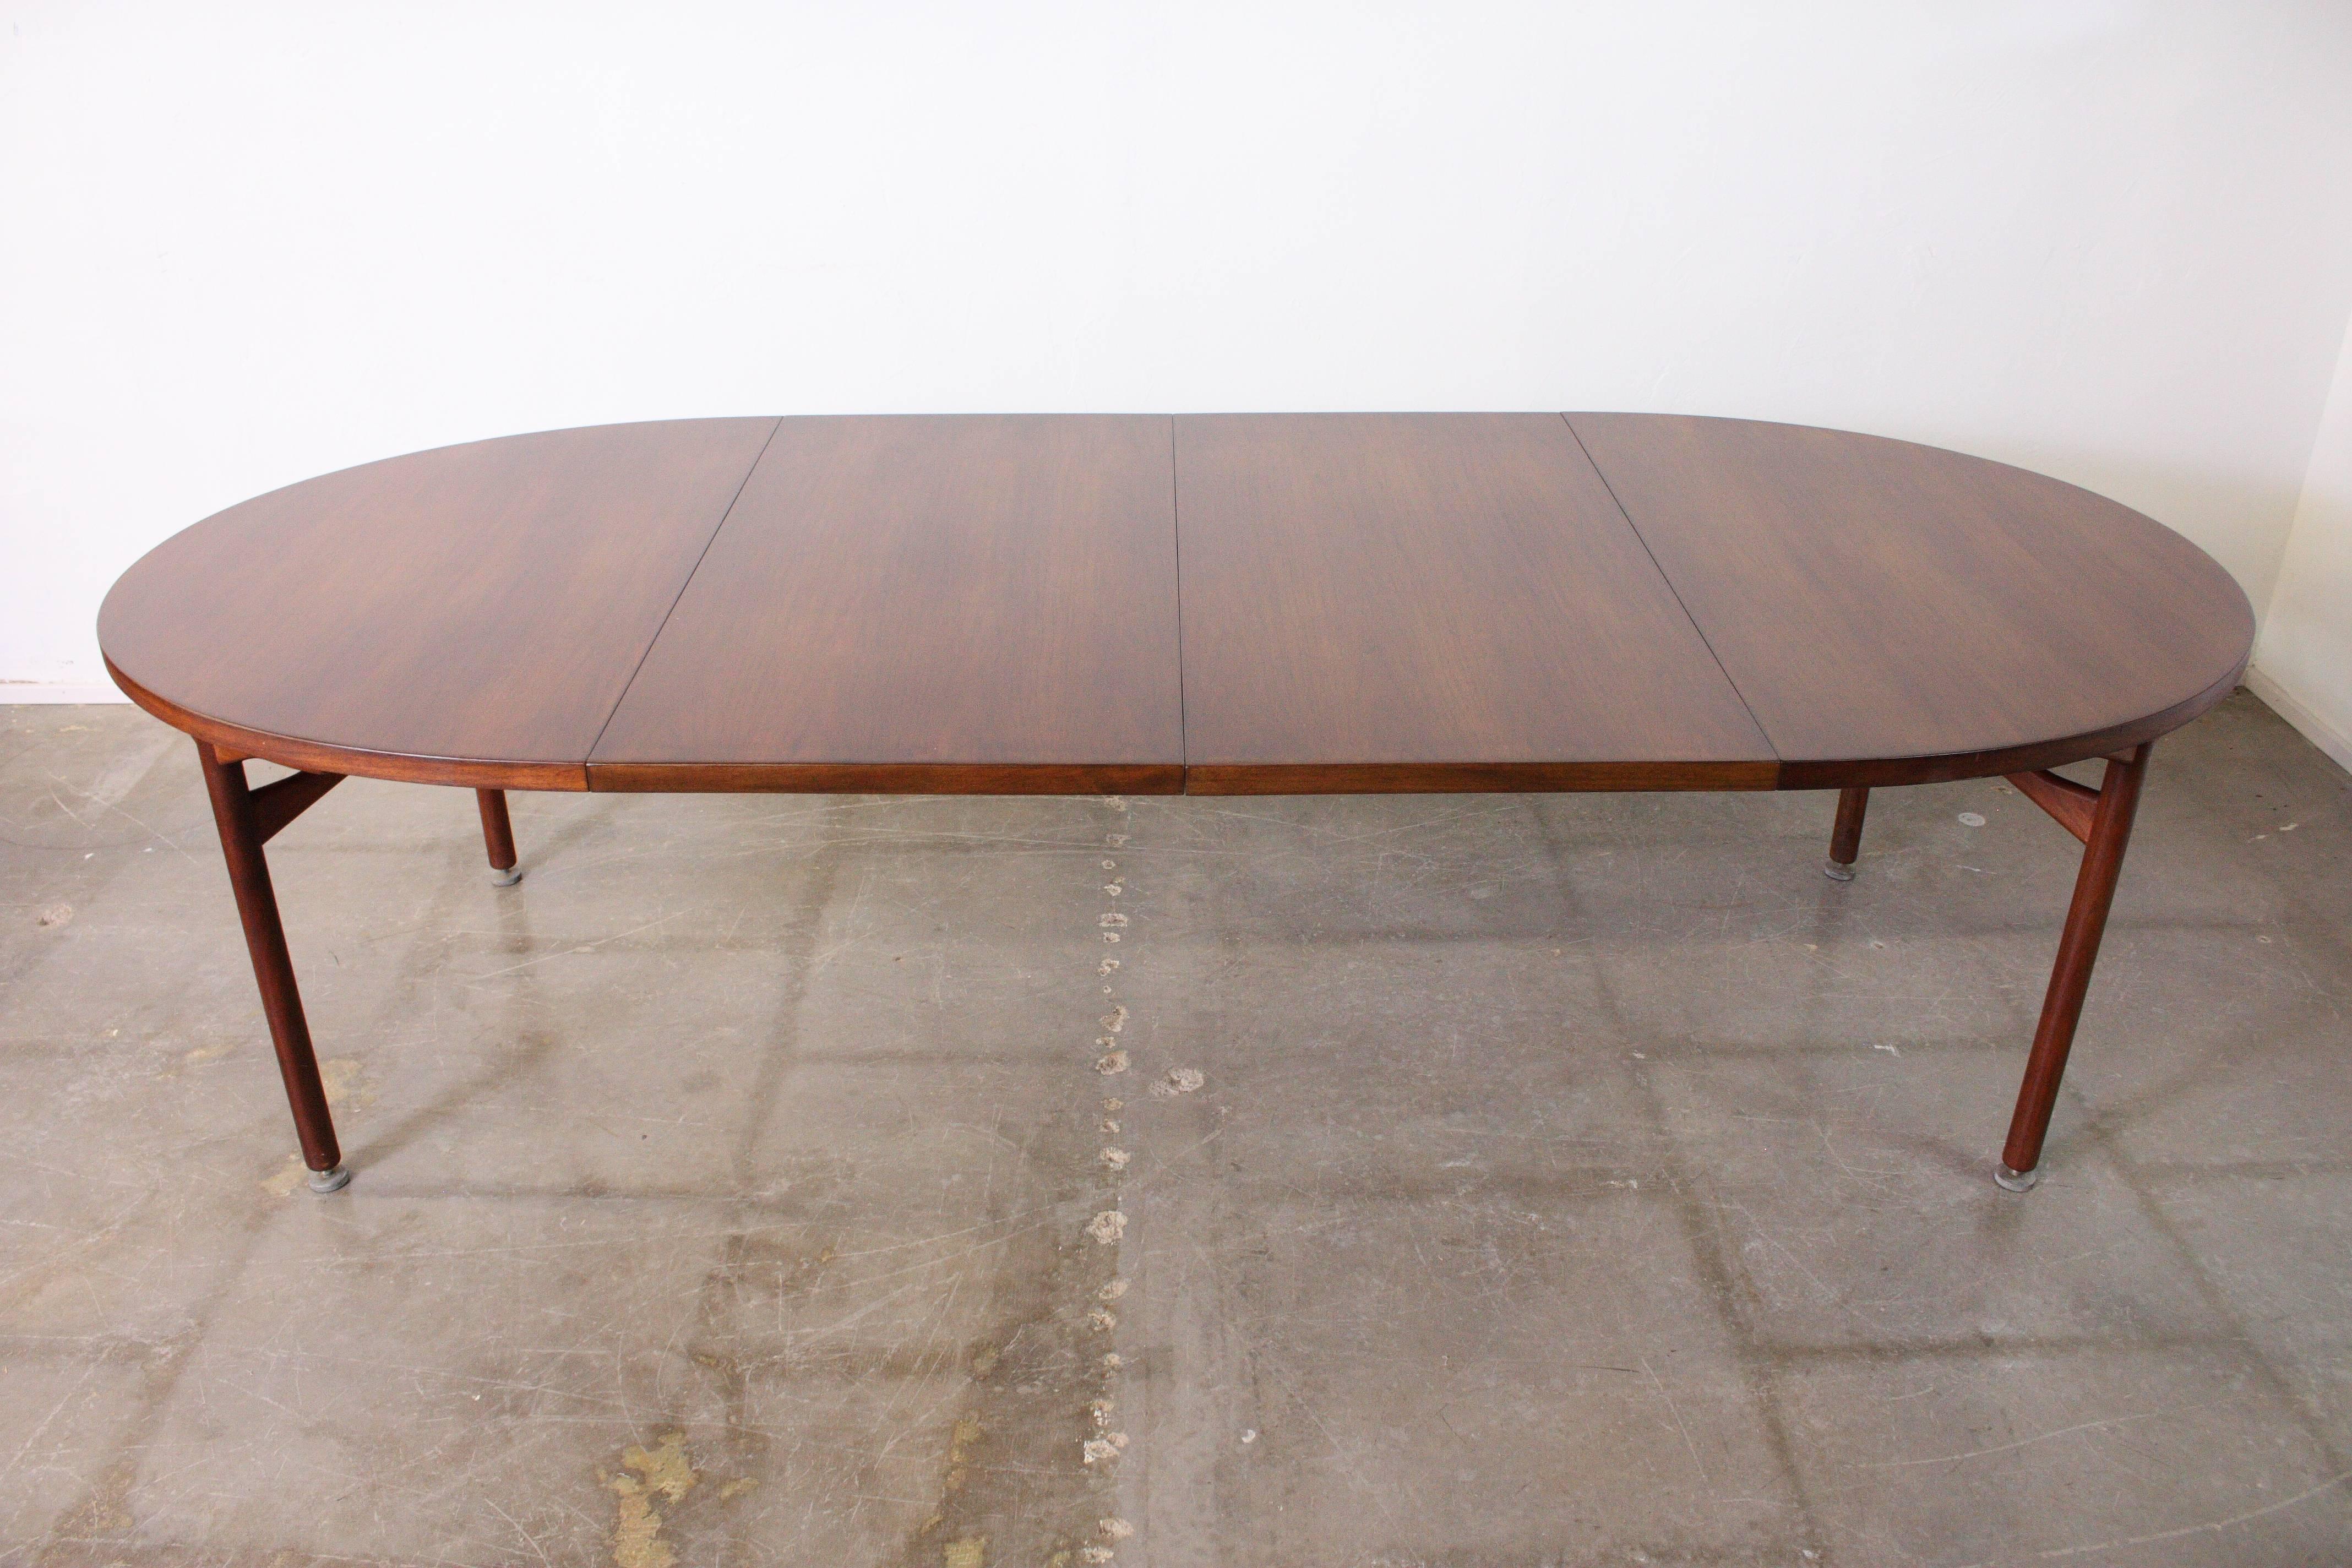 Very versatile dining table by Jens Risom. Expands from 60